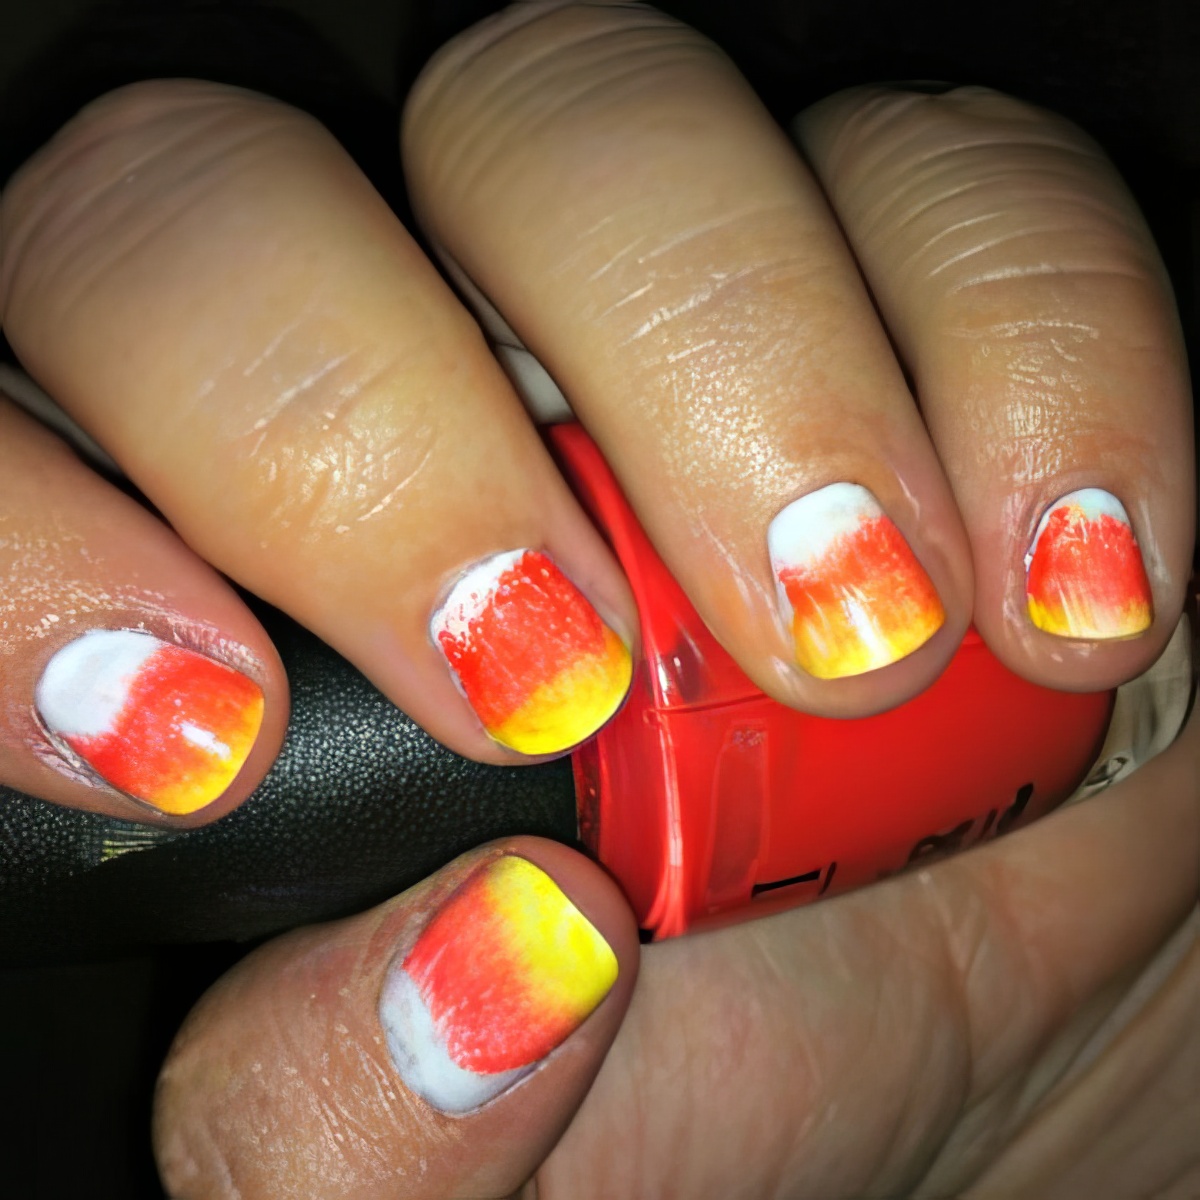 Get stripes and candy corn nails design this Halloween with the girls!